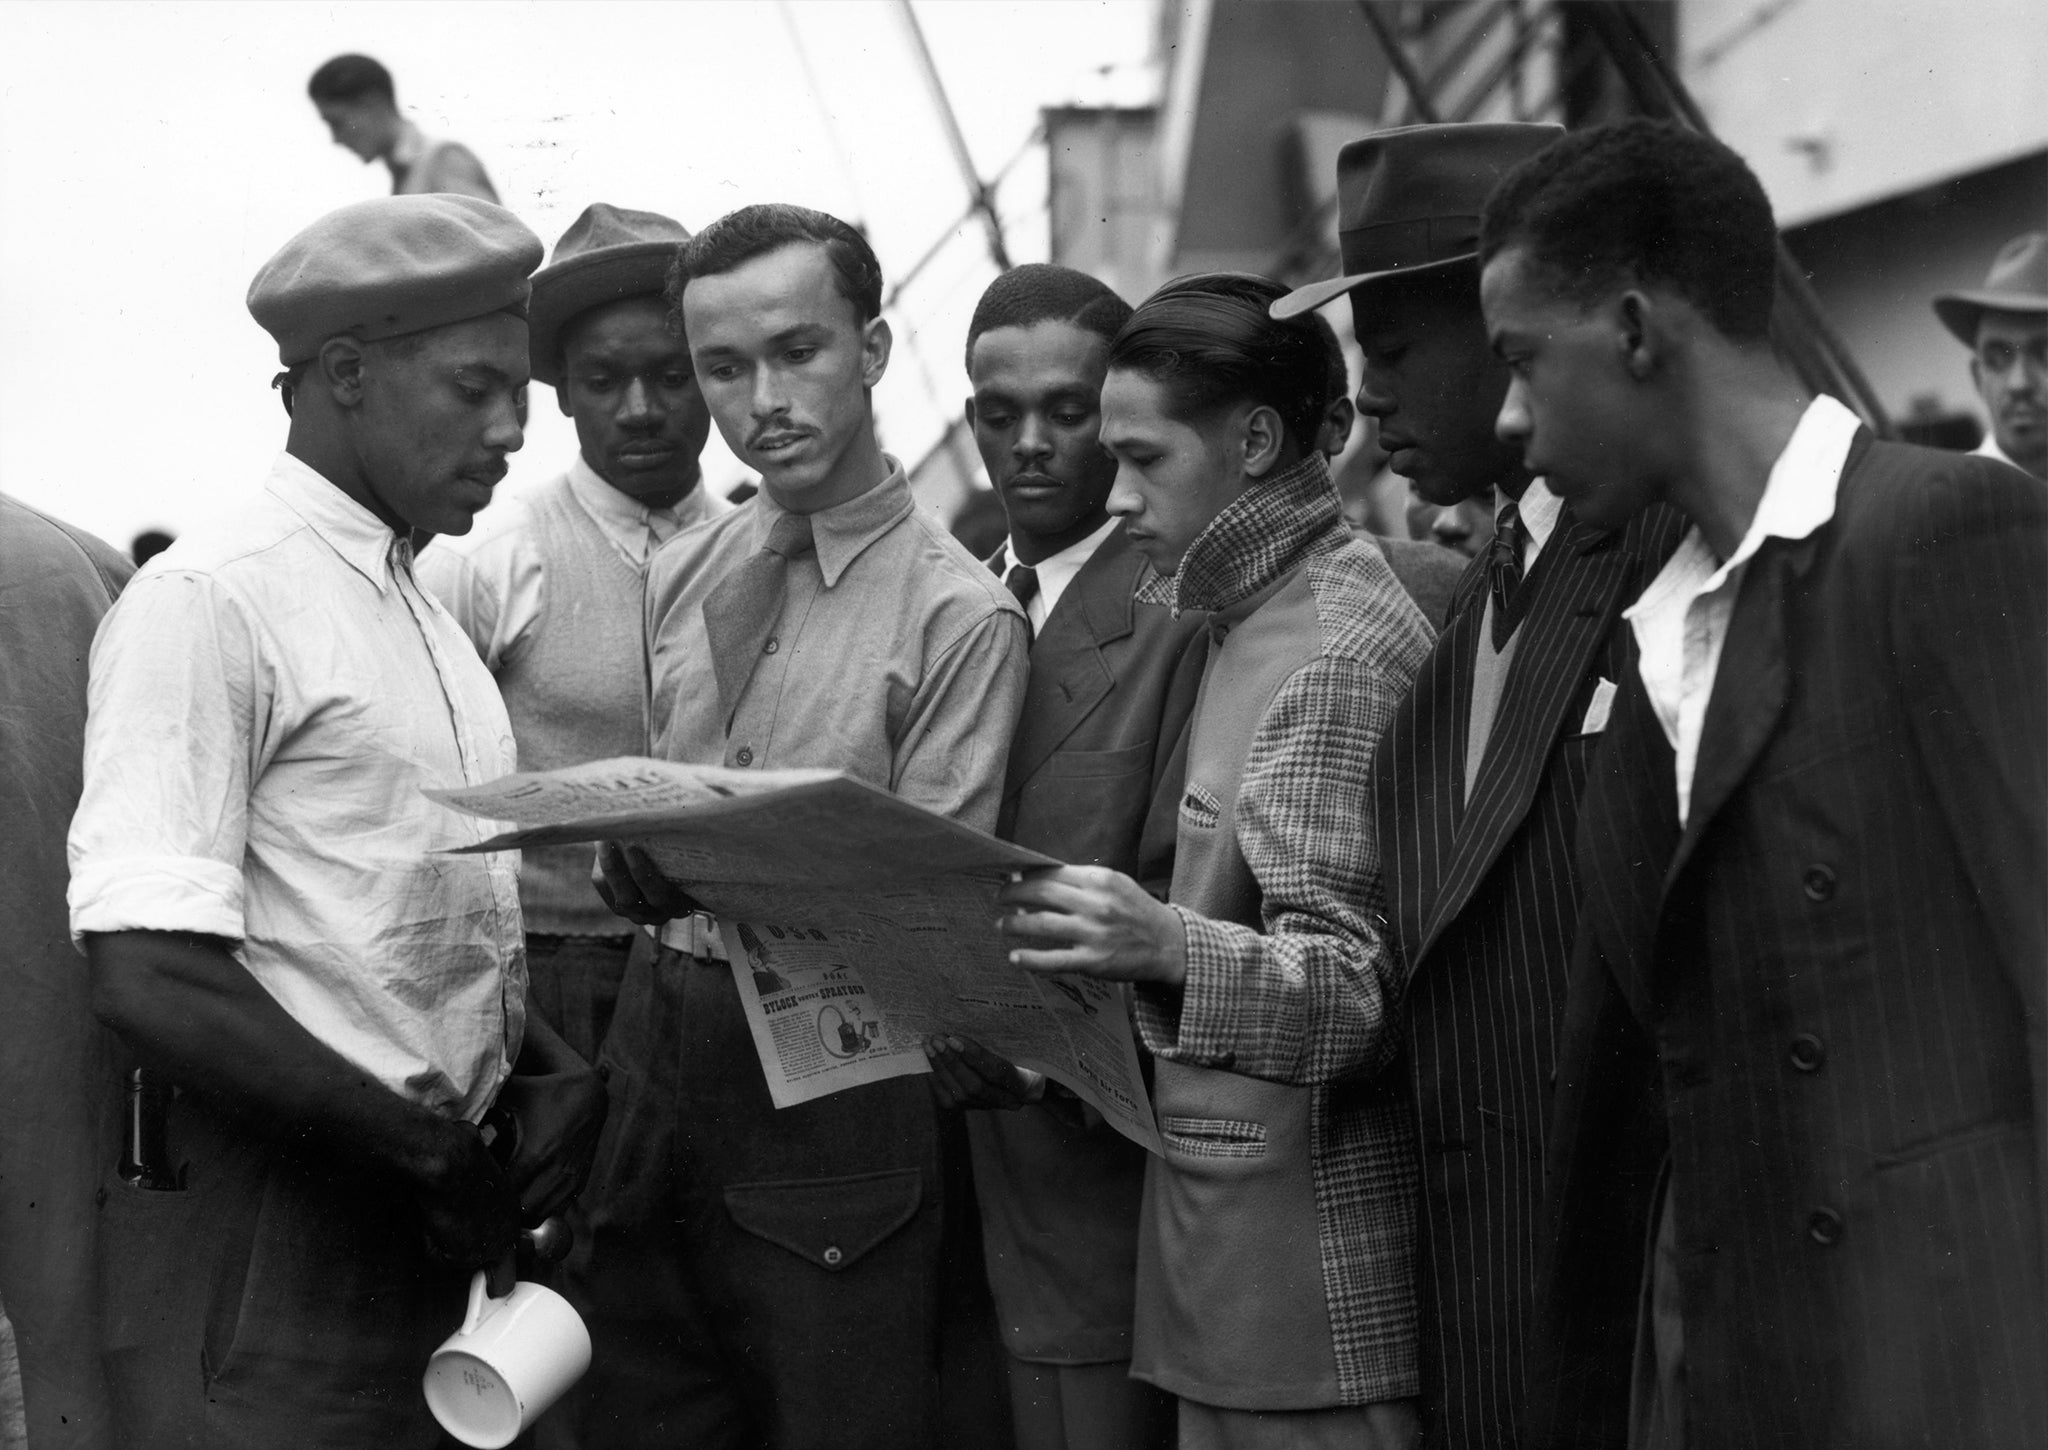 Newly arrived Jamaican immigrants on board the 'Empire Windrush' in 1948